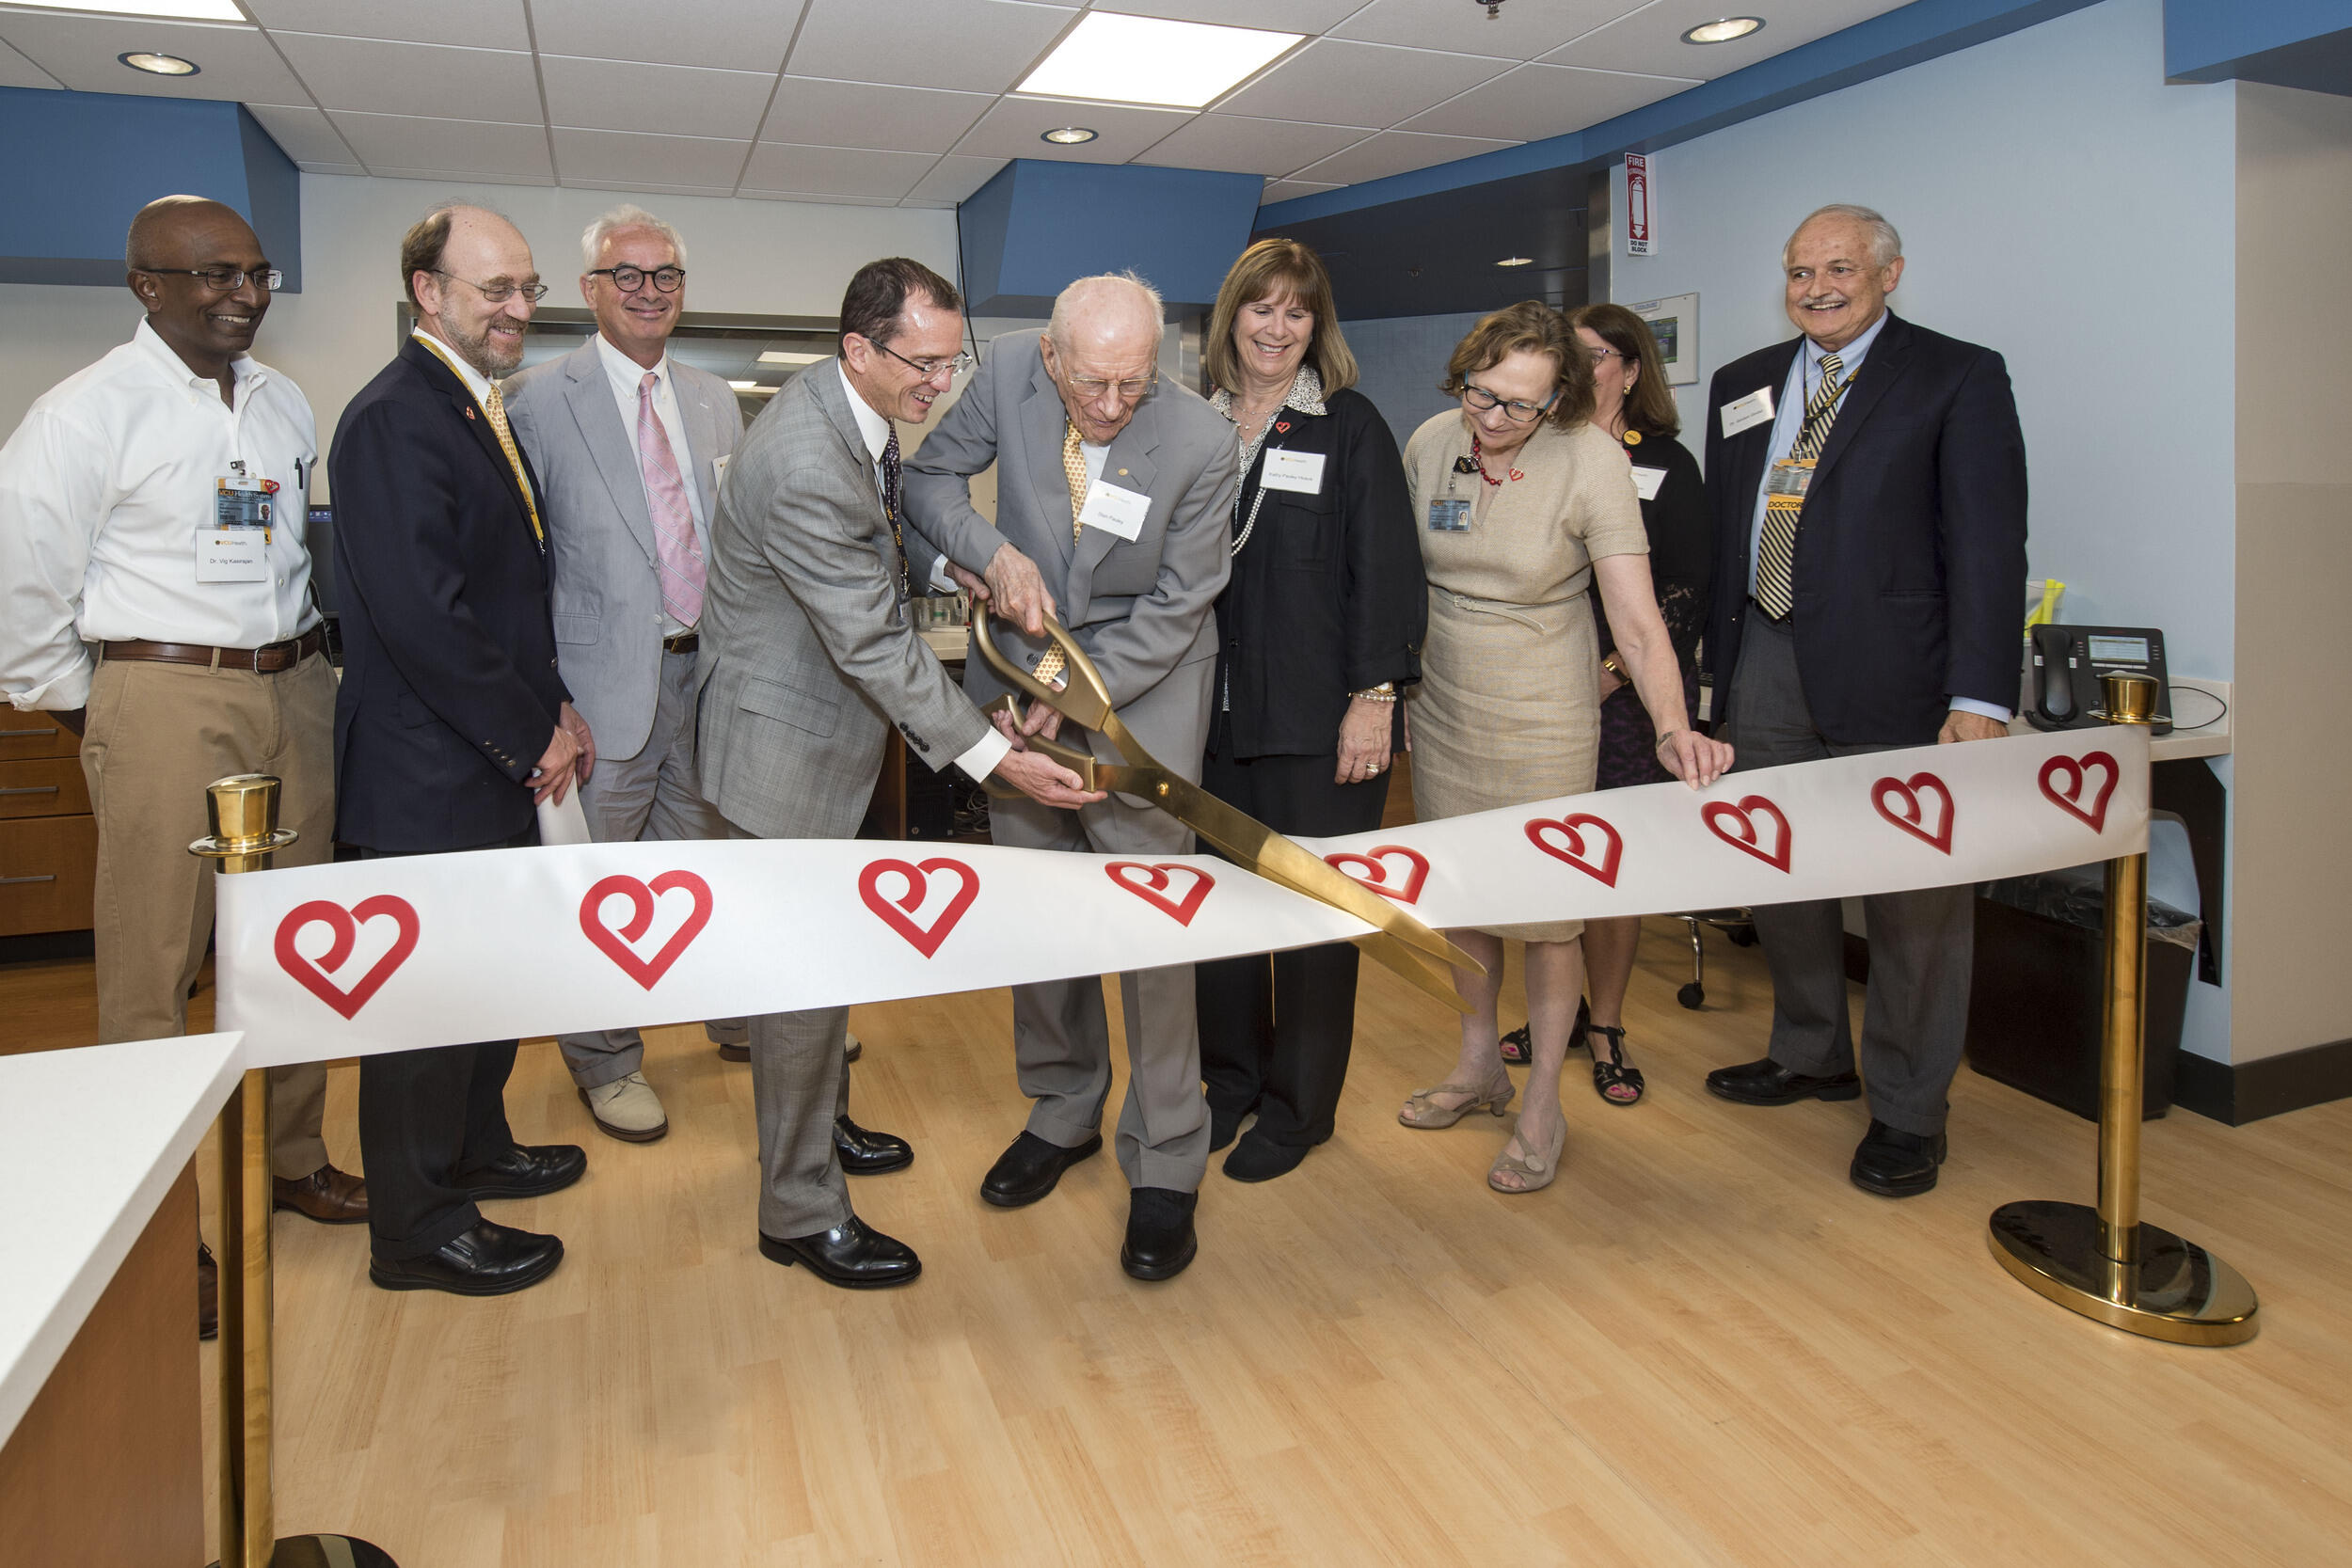 Two people, part of a larger group, use a large pair of scissors to cut a ribbon adorned with the V C U Pauley Heart Center logo.